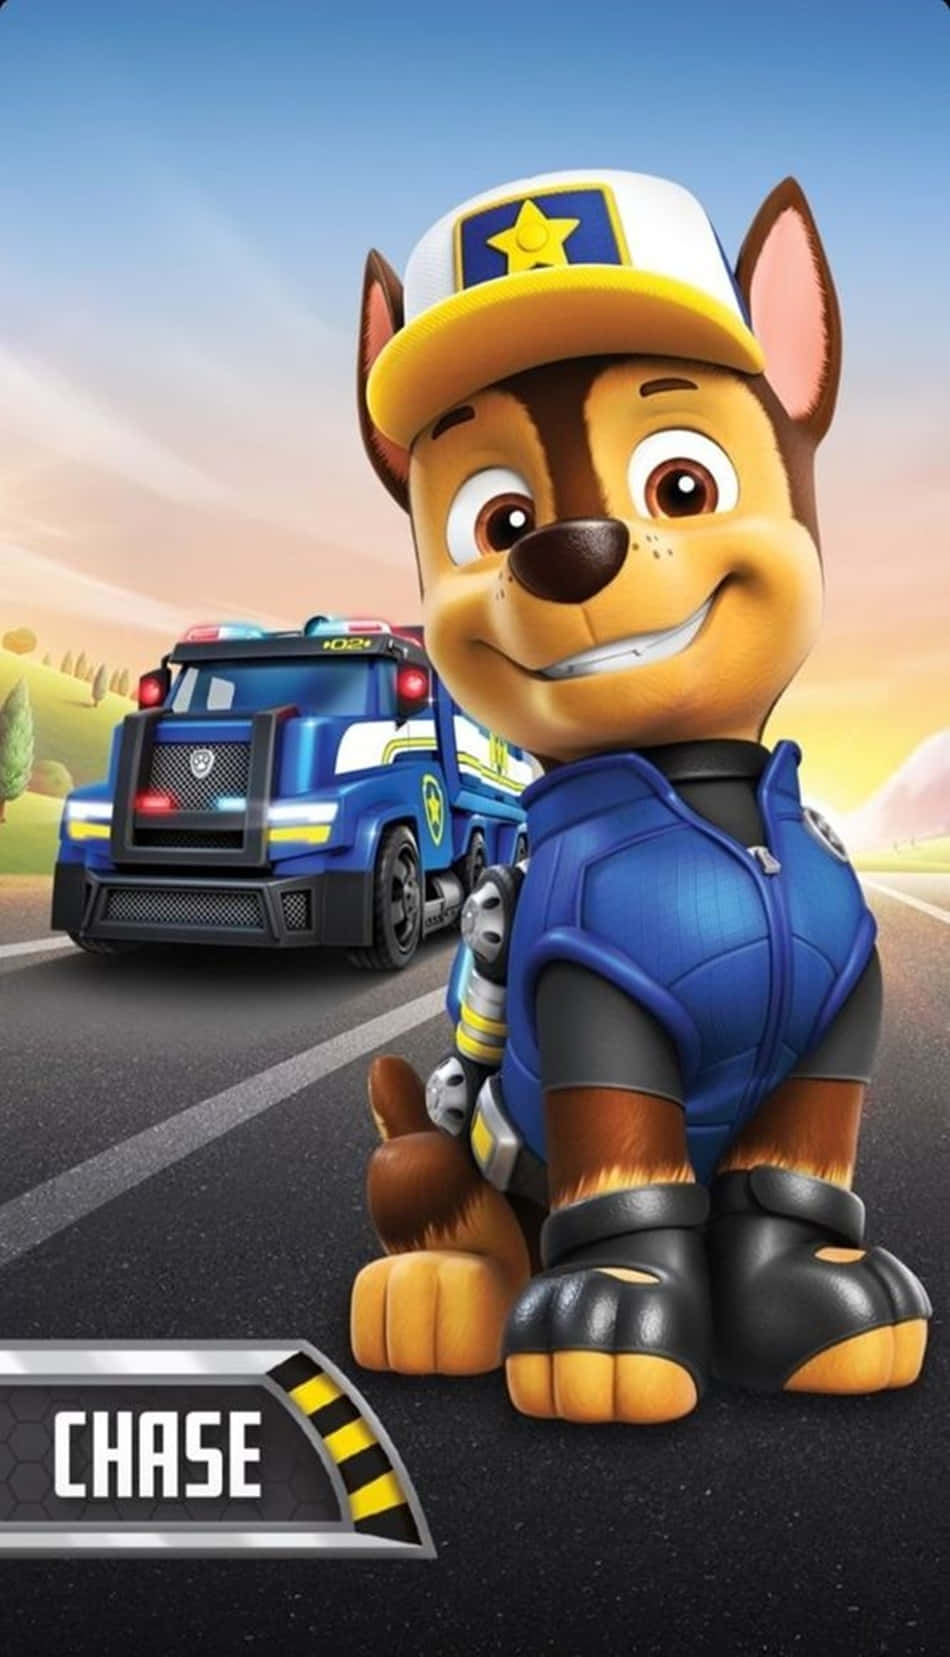 Chase Paw Patrol With Police Truck Wallpaper